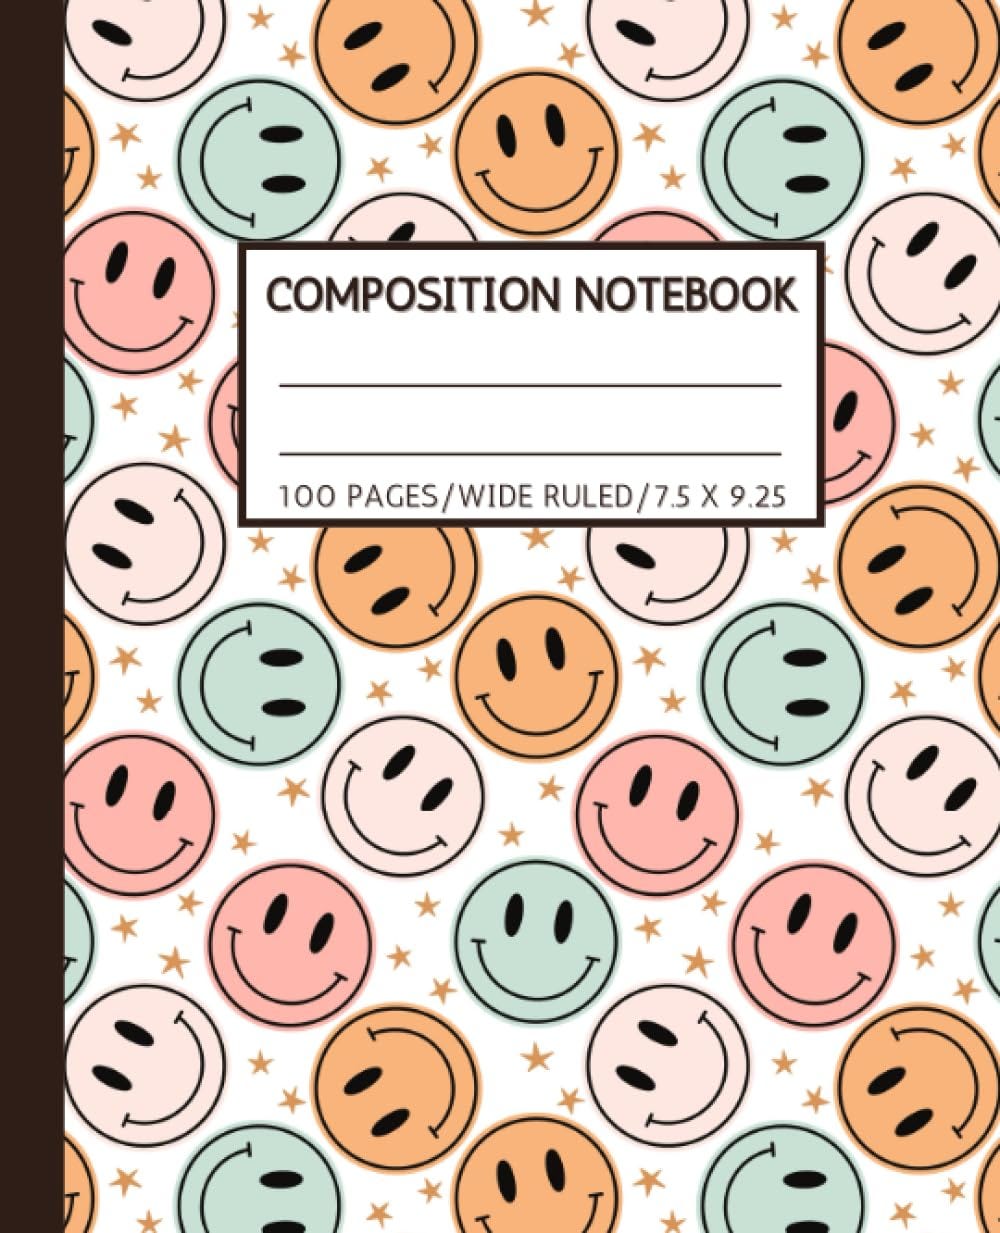 READ] Composition Notebook Wide Ruled: Smiley Faces Aesthetic Preppy  Notebook | Cute Composition Notebooks For Teen Girls | by Kellyhart | Medium